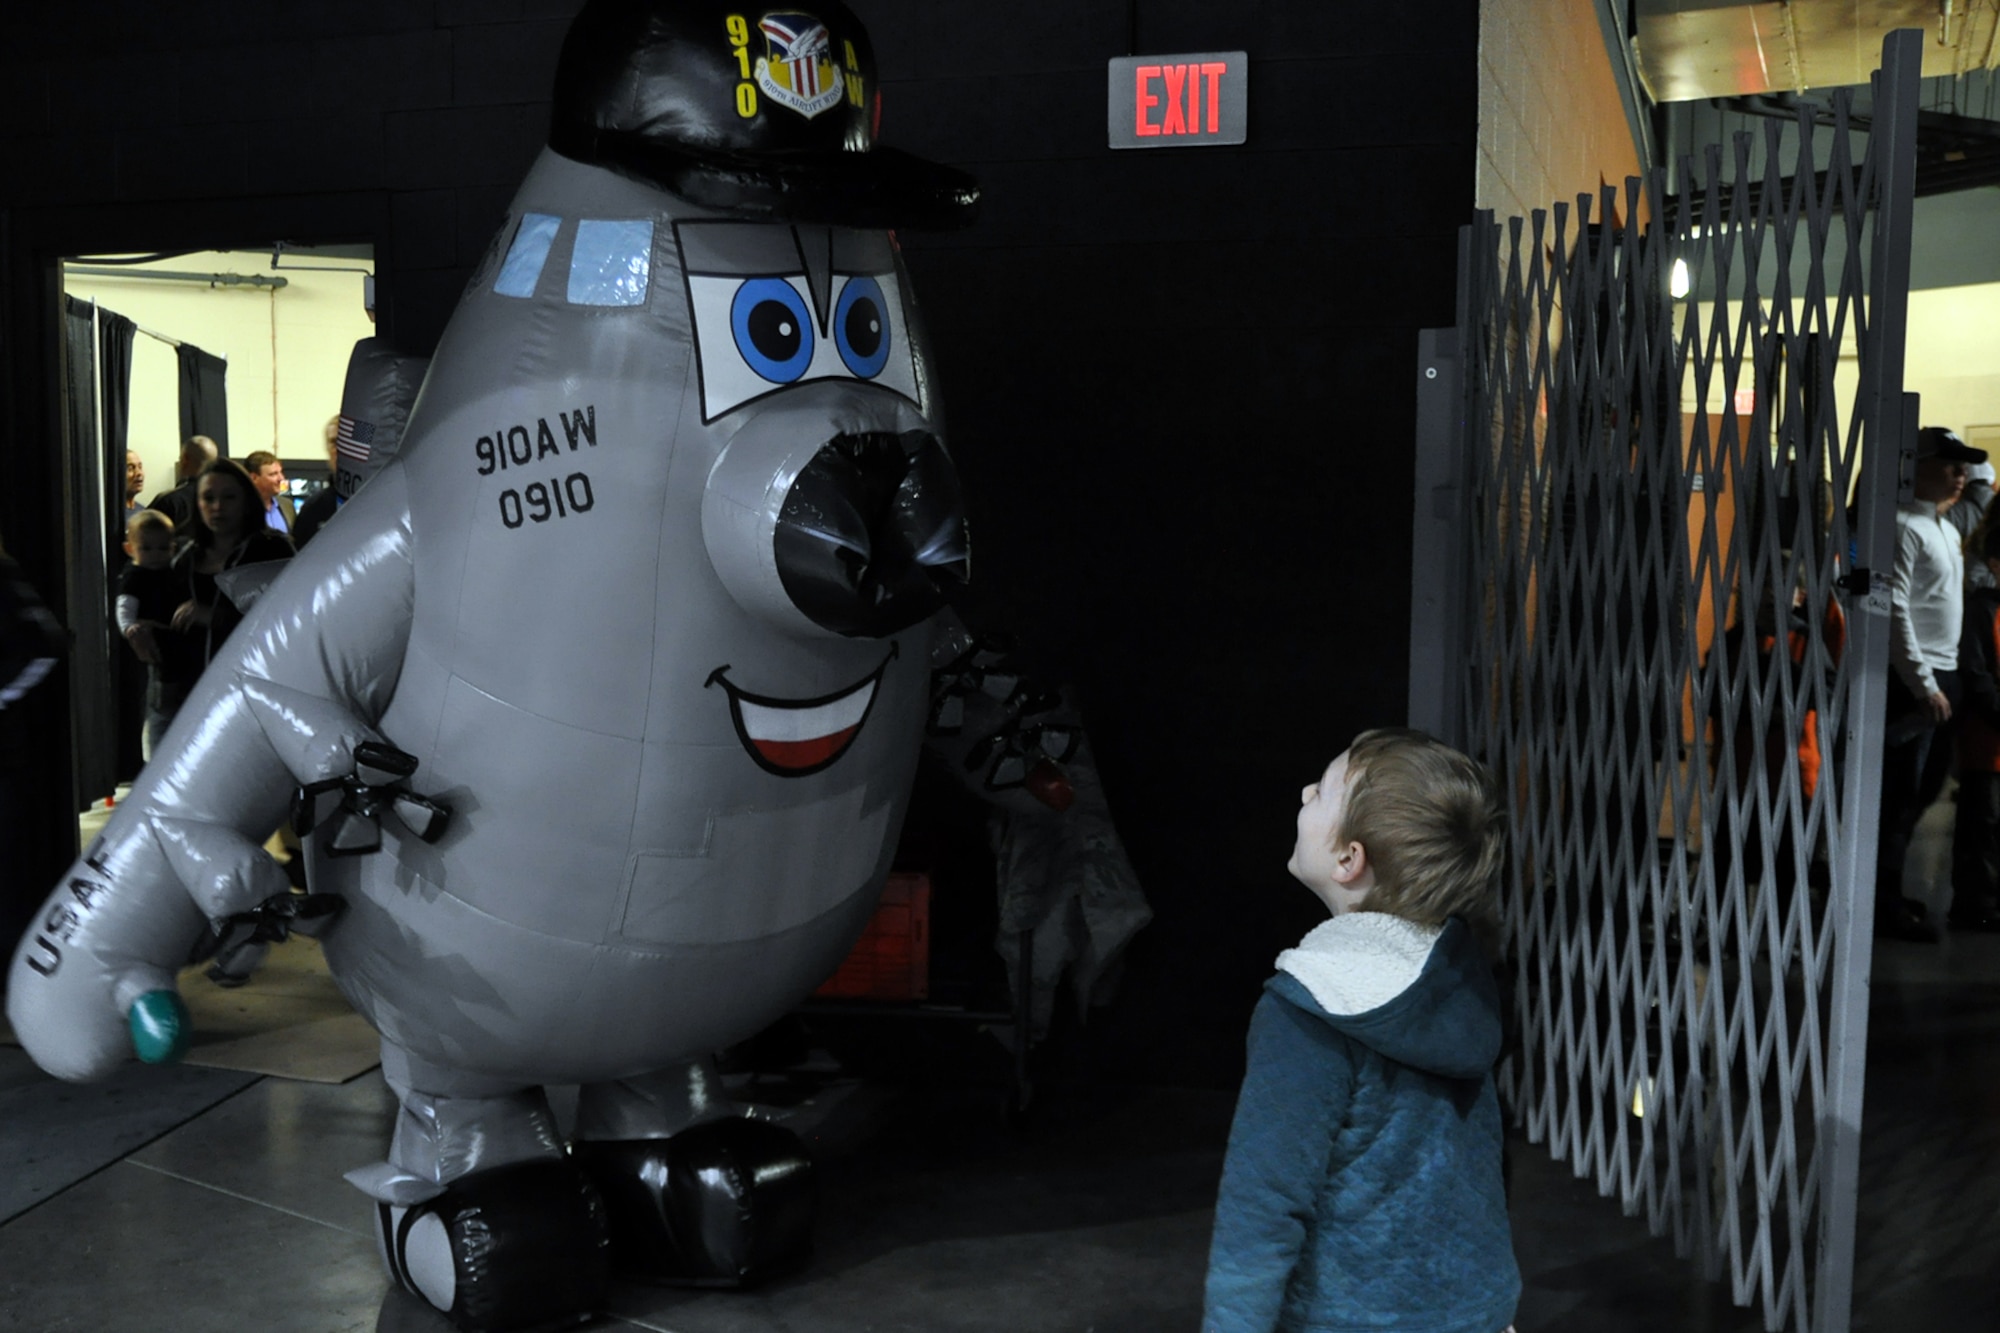 Winger, the new mascot of the 910th Airlift Wing, greets a young hockey fan at the conclusion of a Youngstown Phantoms hockey game at the Covelli Centre here, April 2, 2016. A group of Citizen Airmen, based at nearby Youngstown Air Reserve Station, Ohio, participated in YARS Night Out activities before and during the game. The Phantoms, a member of the United States Hockey League, defeated the Omaha Lancers 4-1 in front of a home ice crowd of more than 3000 fans. The custom designed inflatable Winger mascot, created in the U.S. by a company based in Omaha, Nebraska and sponsored by the Youngstown Air Reserve Base Community Council, is based on a 910th Airlift Wing Public Affairs cartoon which has been featured in more than 50 individual illustrations appearing in various wing publications and on the YARS website since 2007. Area residents can keep an eye out for Winger at upcoming base community events and out and about anywhere in the Mahoning Valley. (Courtesy Photo/Deana Barko)